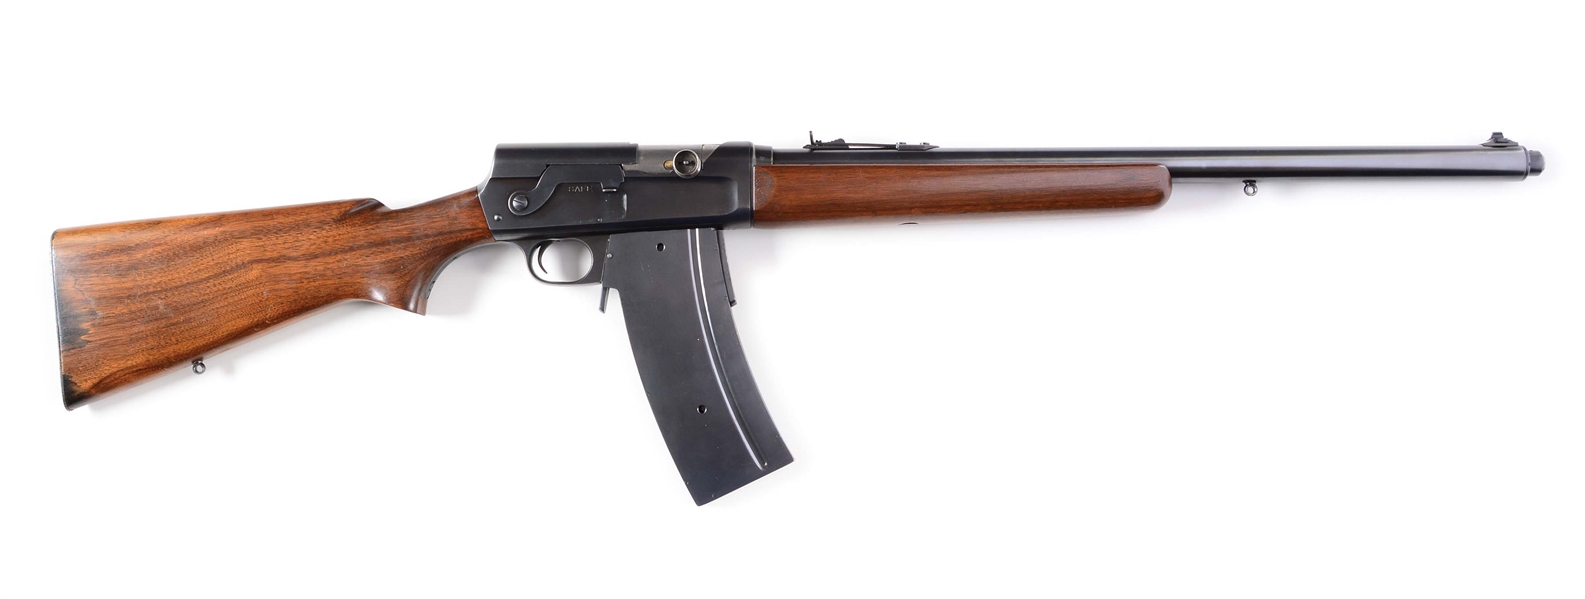 (C) REMINGTON MODEL 81 WOODMASTER, SPECIAL POLICE SEMI-AUTOMATIC RIFLE - LOS ANGELES POLICE MARKED WITH EXTENDED MAGAZINE.